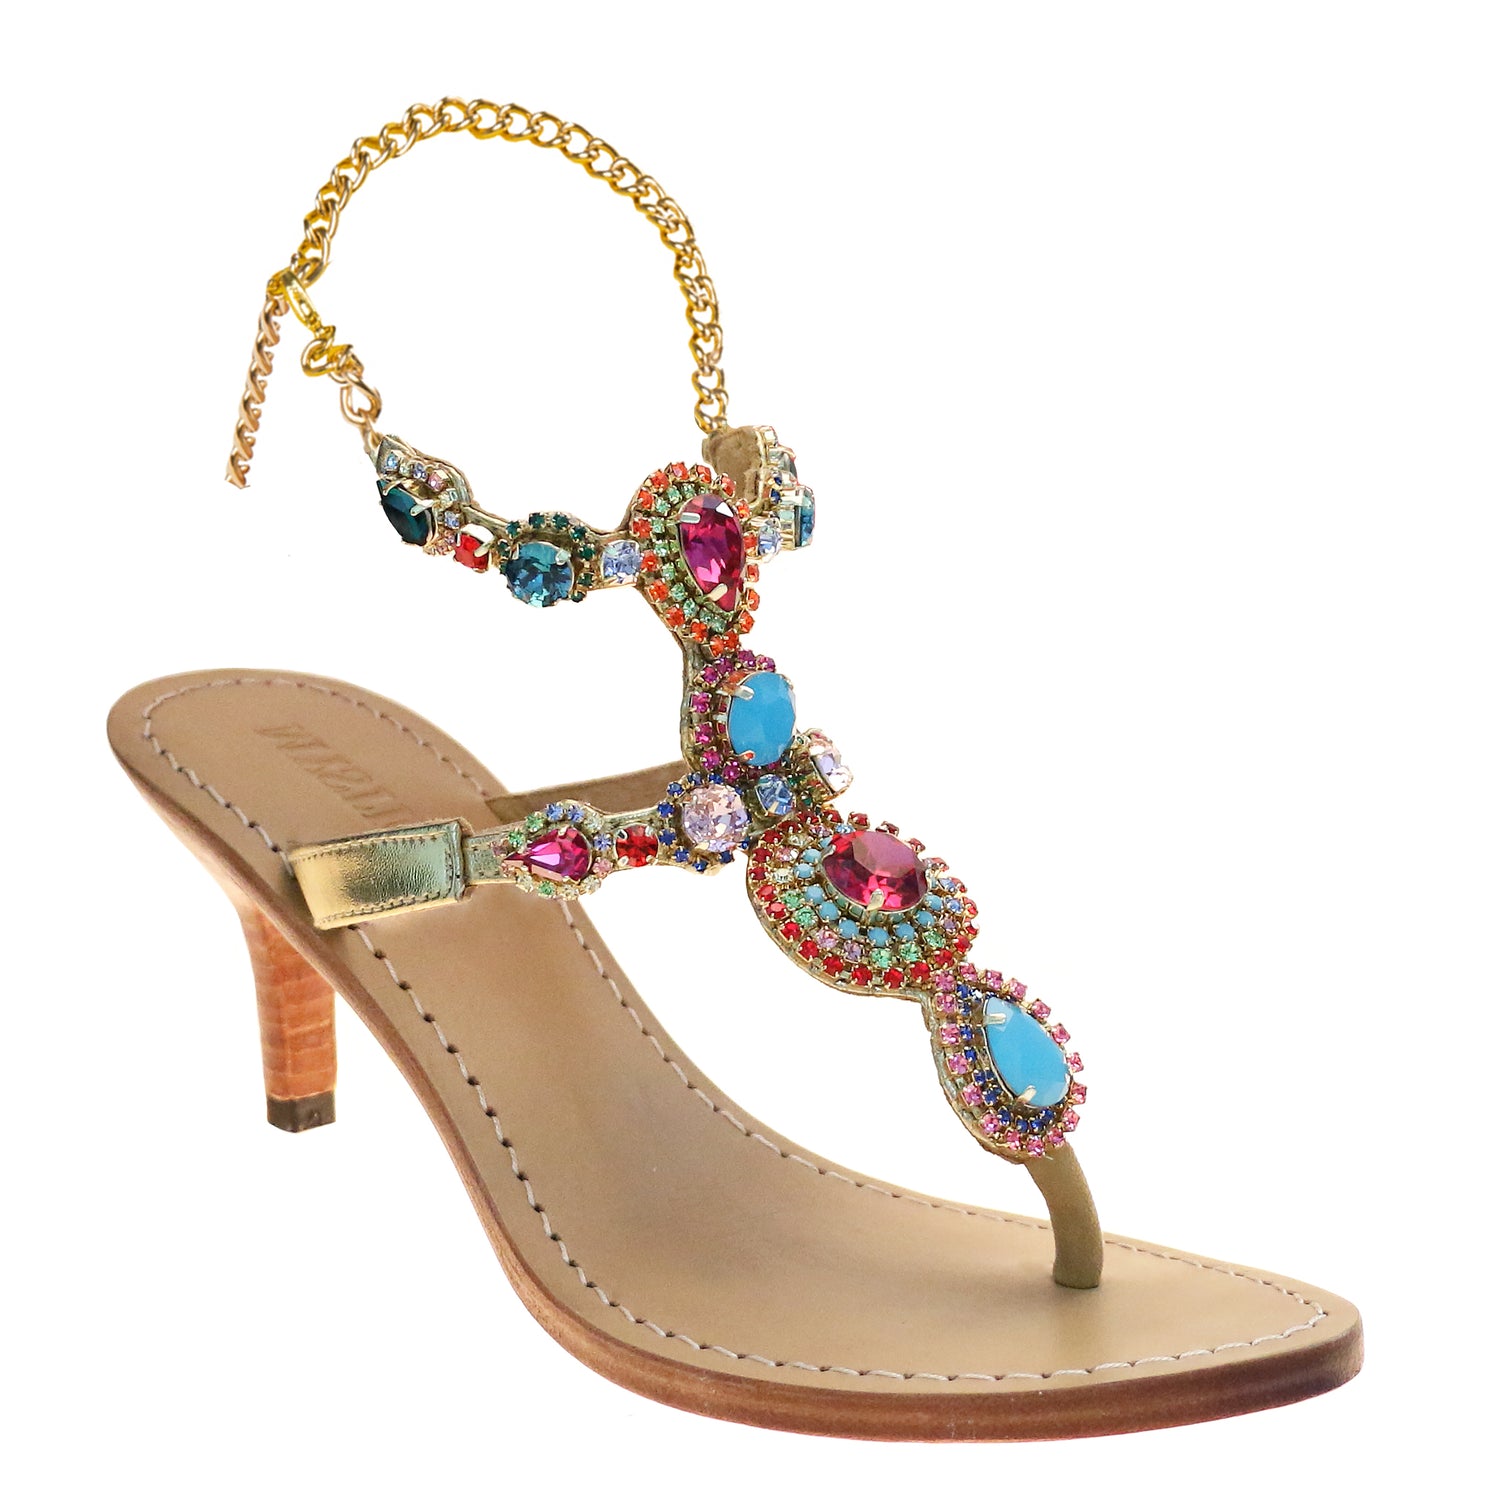 HAMPTON MYSTIQUE SANDALS HANDMADE MULTICOLORED JEWELED THIONG HEELED SANDALS WITH DIAMONTE CRYSTALS AND ANKLE CHAIN 1500x ?v=1579896734